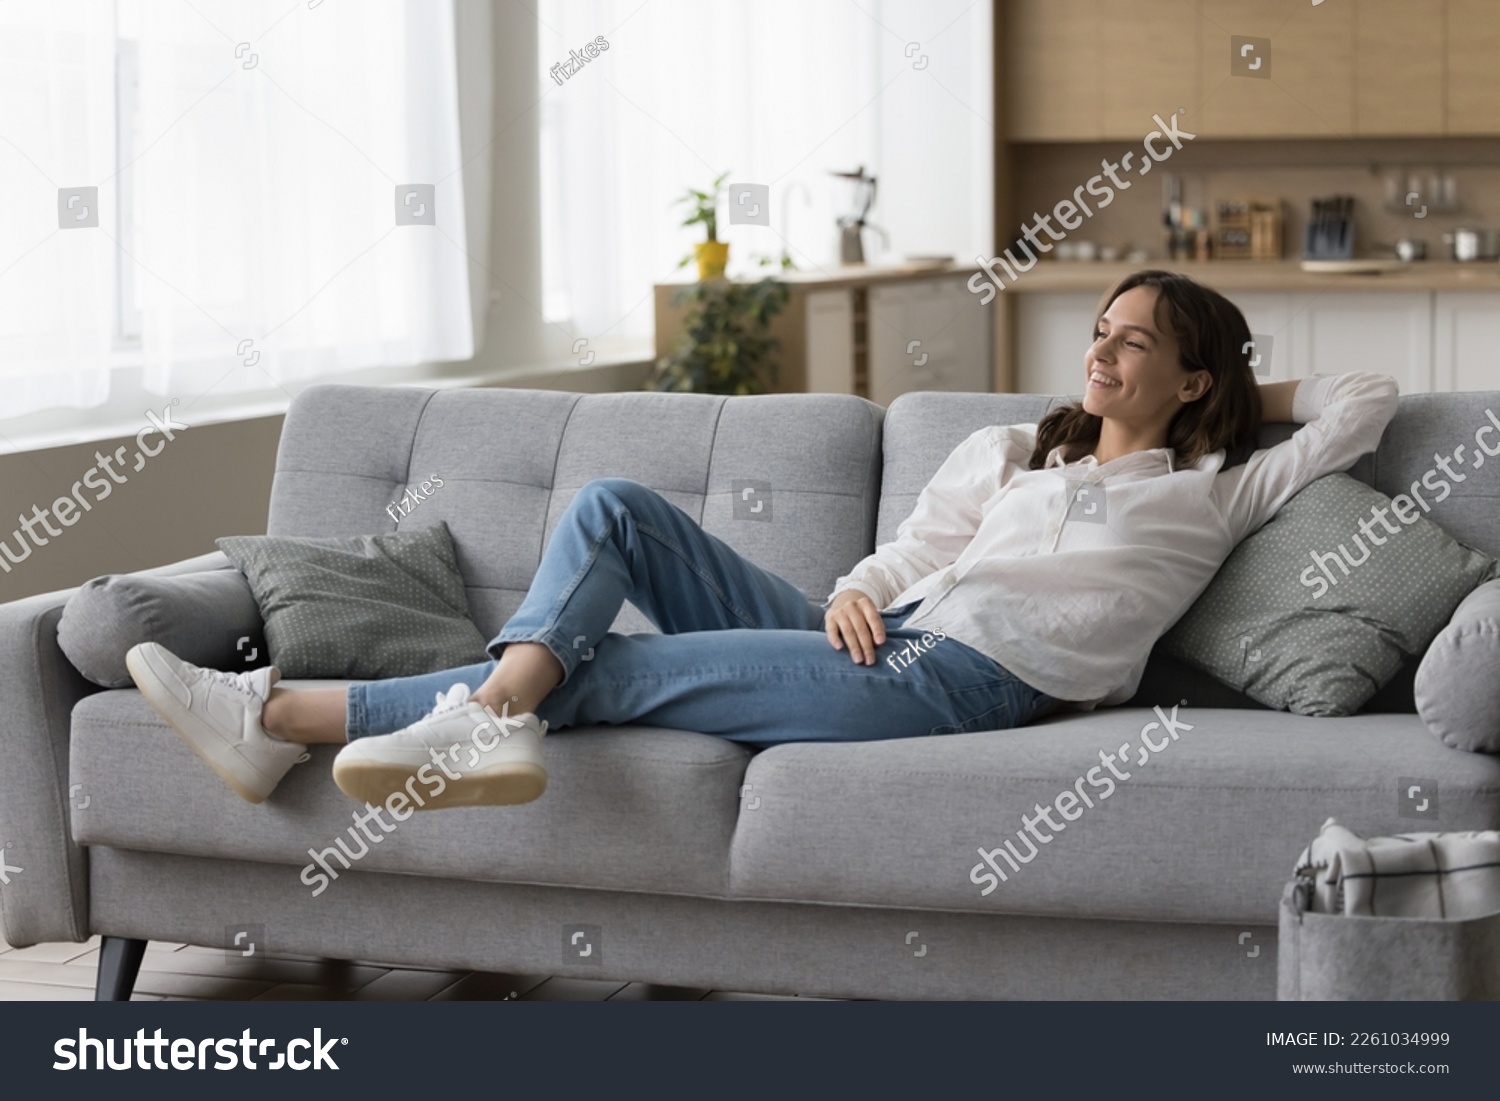 Positive peaceful young woman resting on sofa at home, leaning on back, breathing fresh air, looking at window away, enjoying break, leisure, thinking, dreaming. Full length shot #2261034999